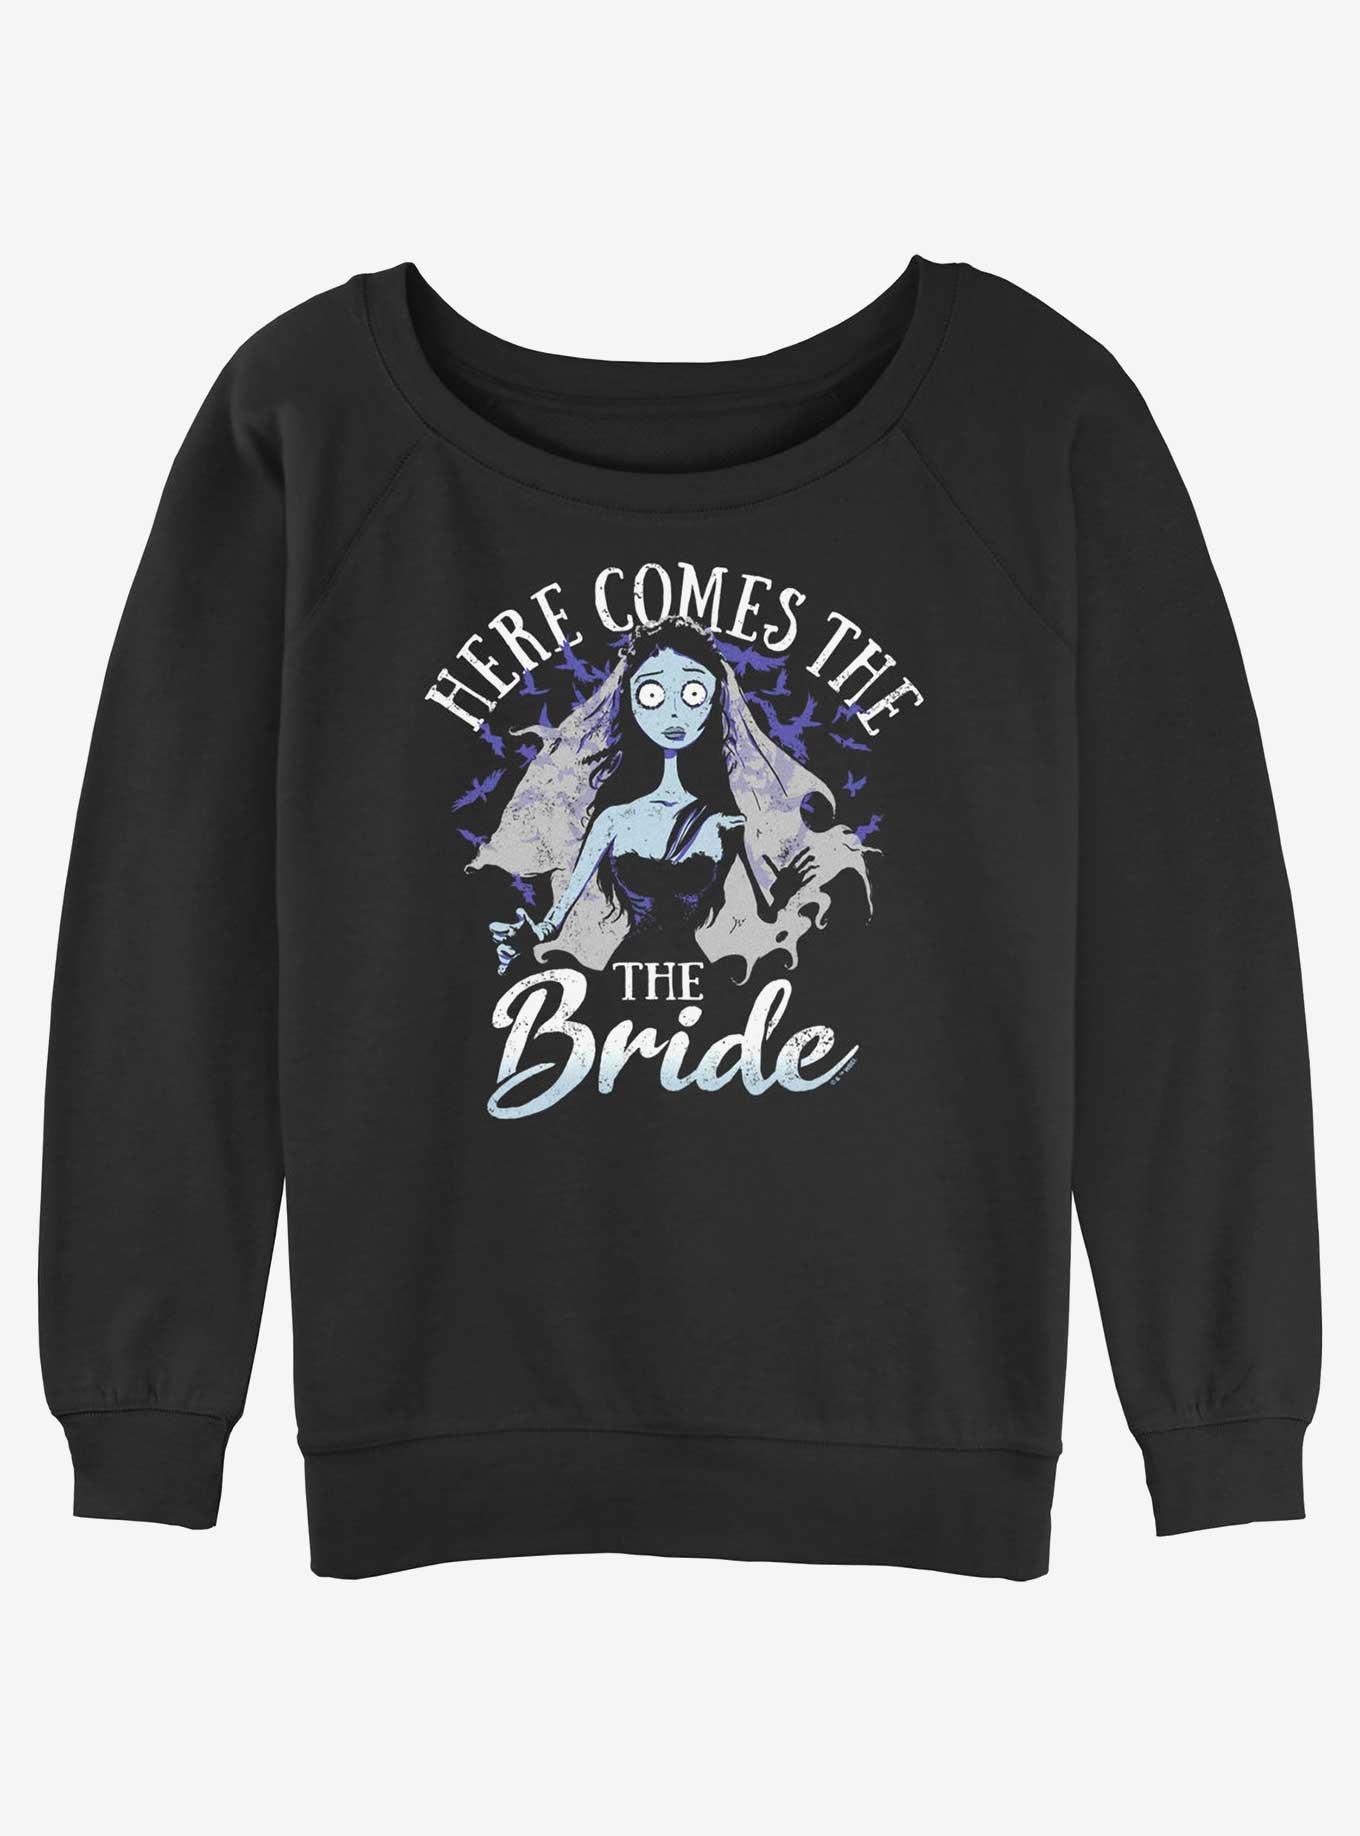 Corpse Bride Here Comes The Girls Slouchy Sweatshirt